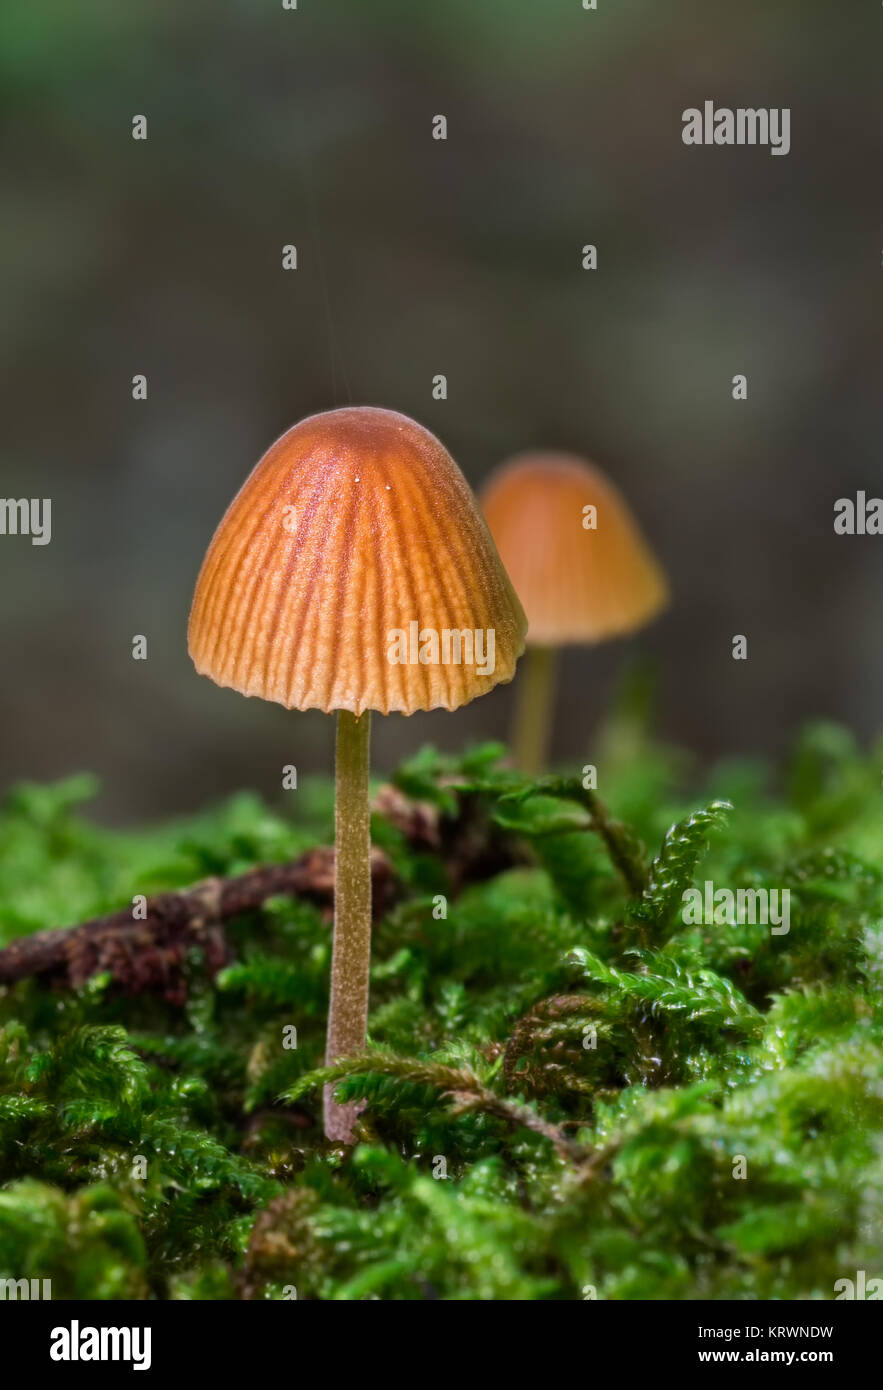 Mushrooms photographed in their natural environment Stock Photo